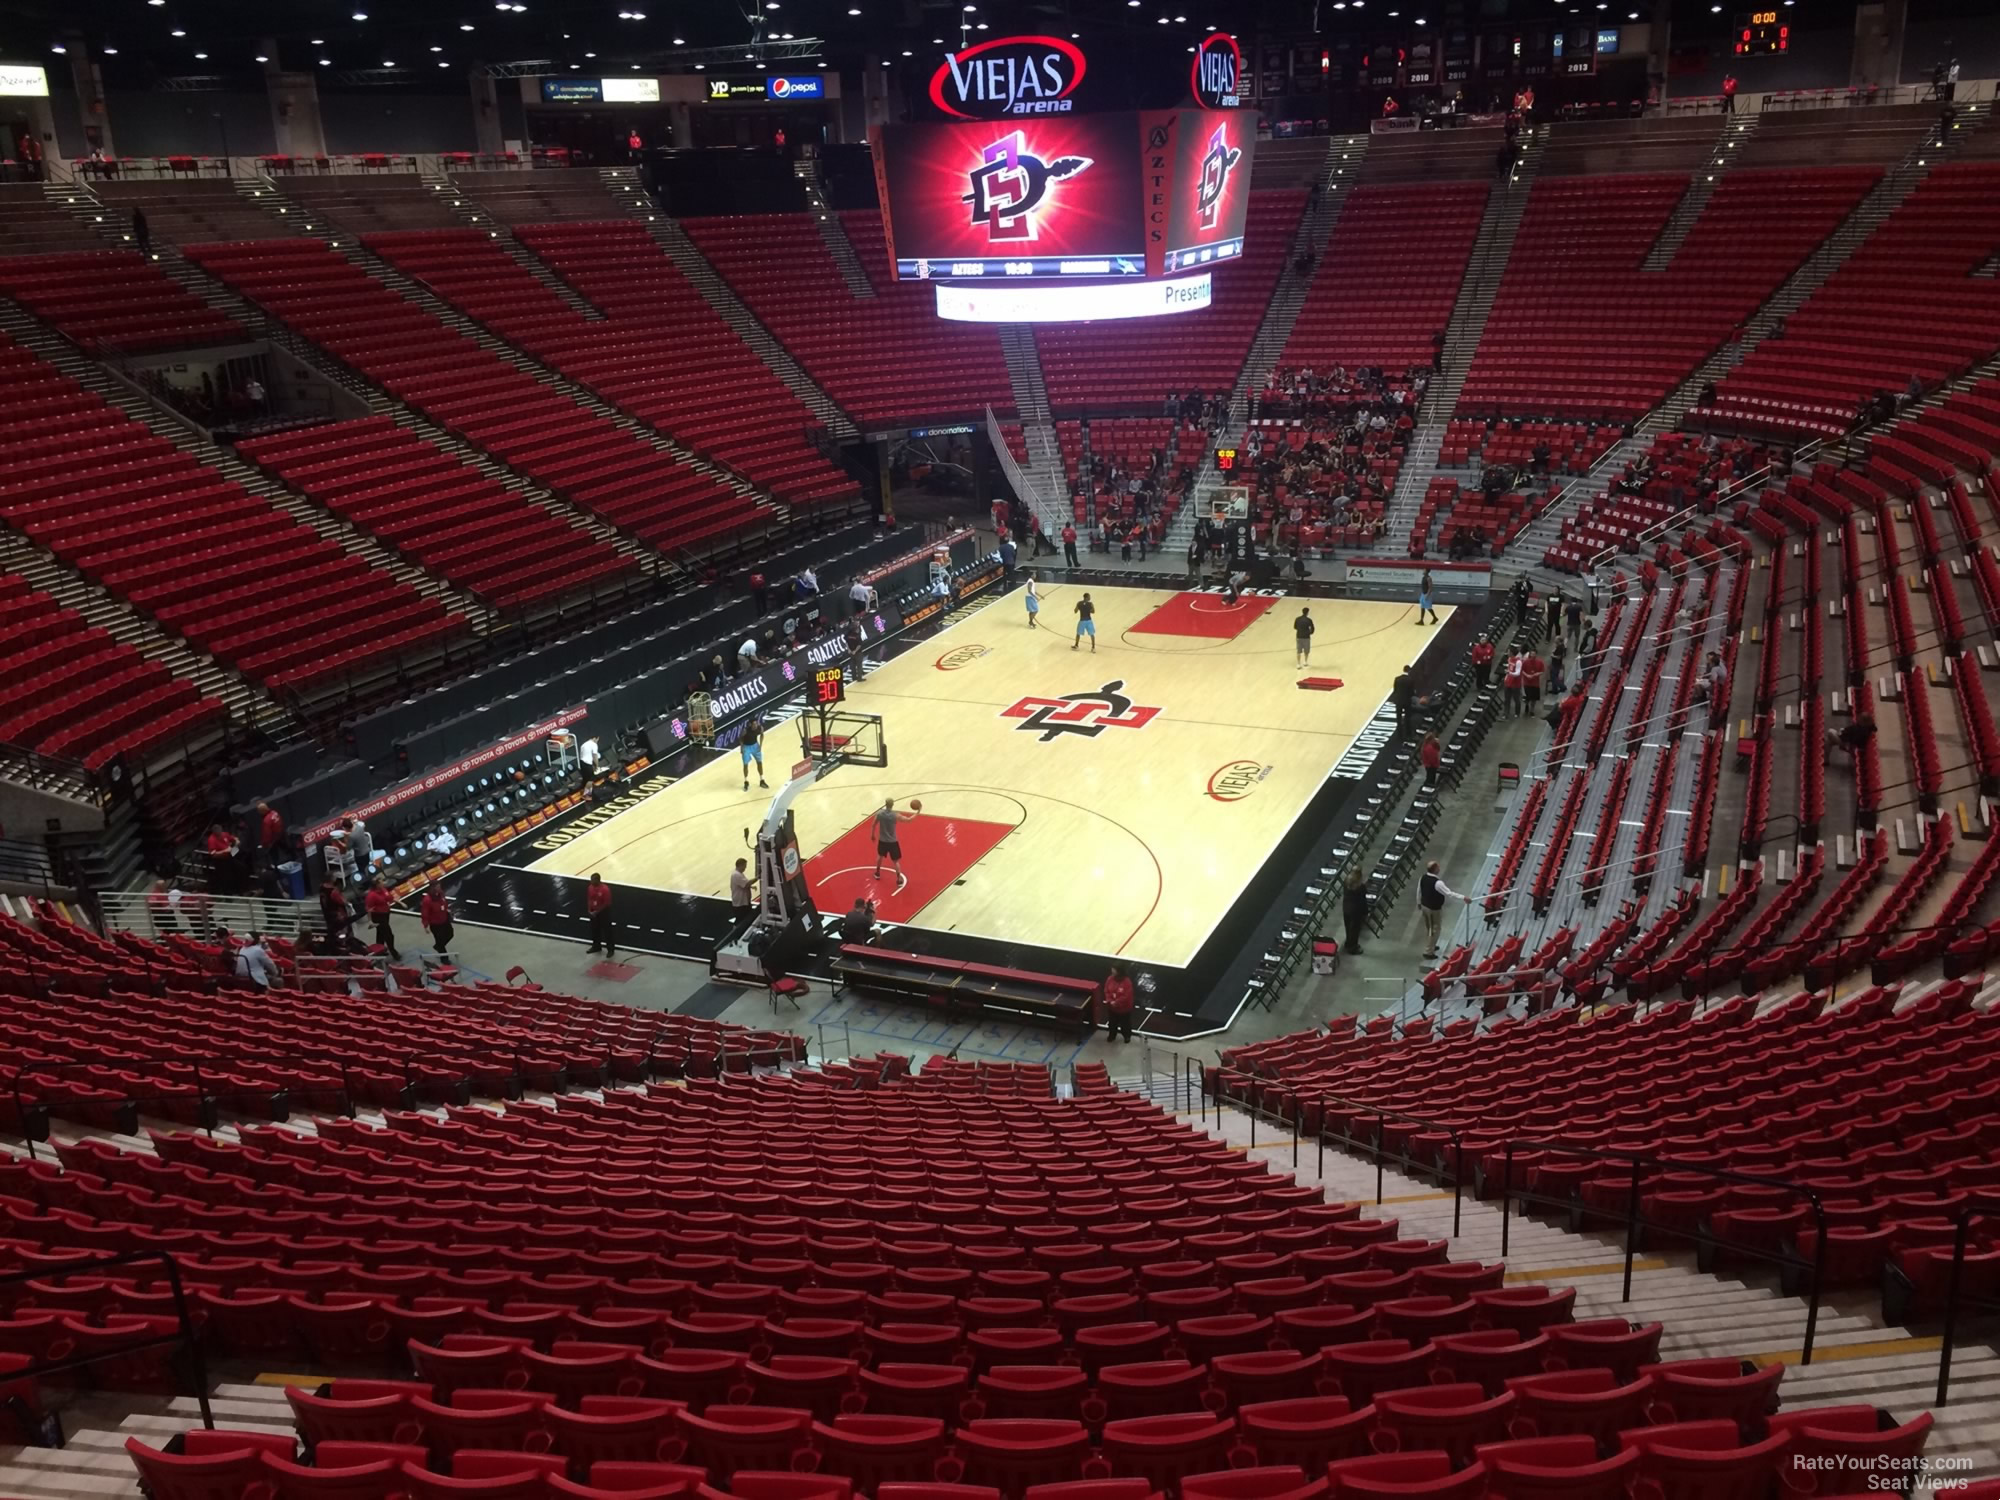 Section B at Viejas Arena 